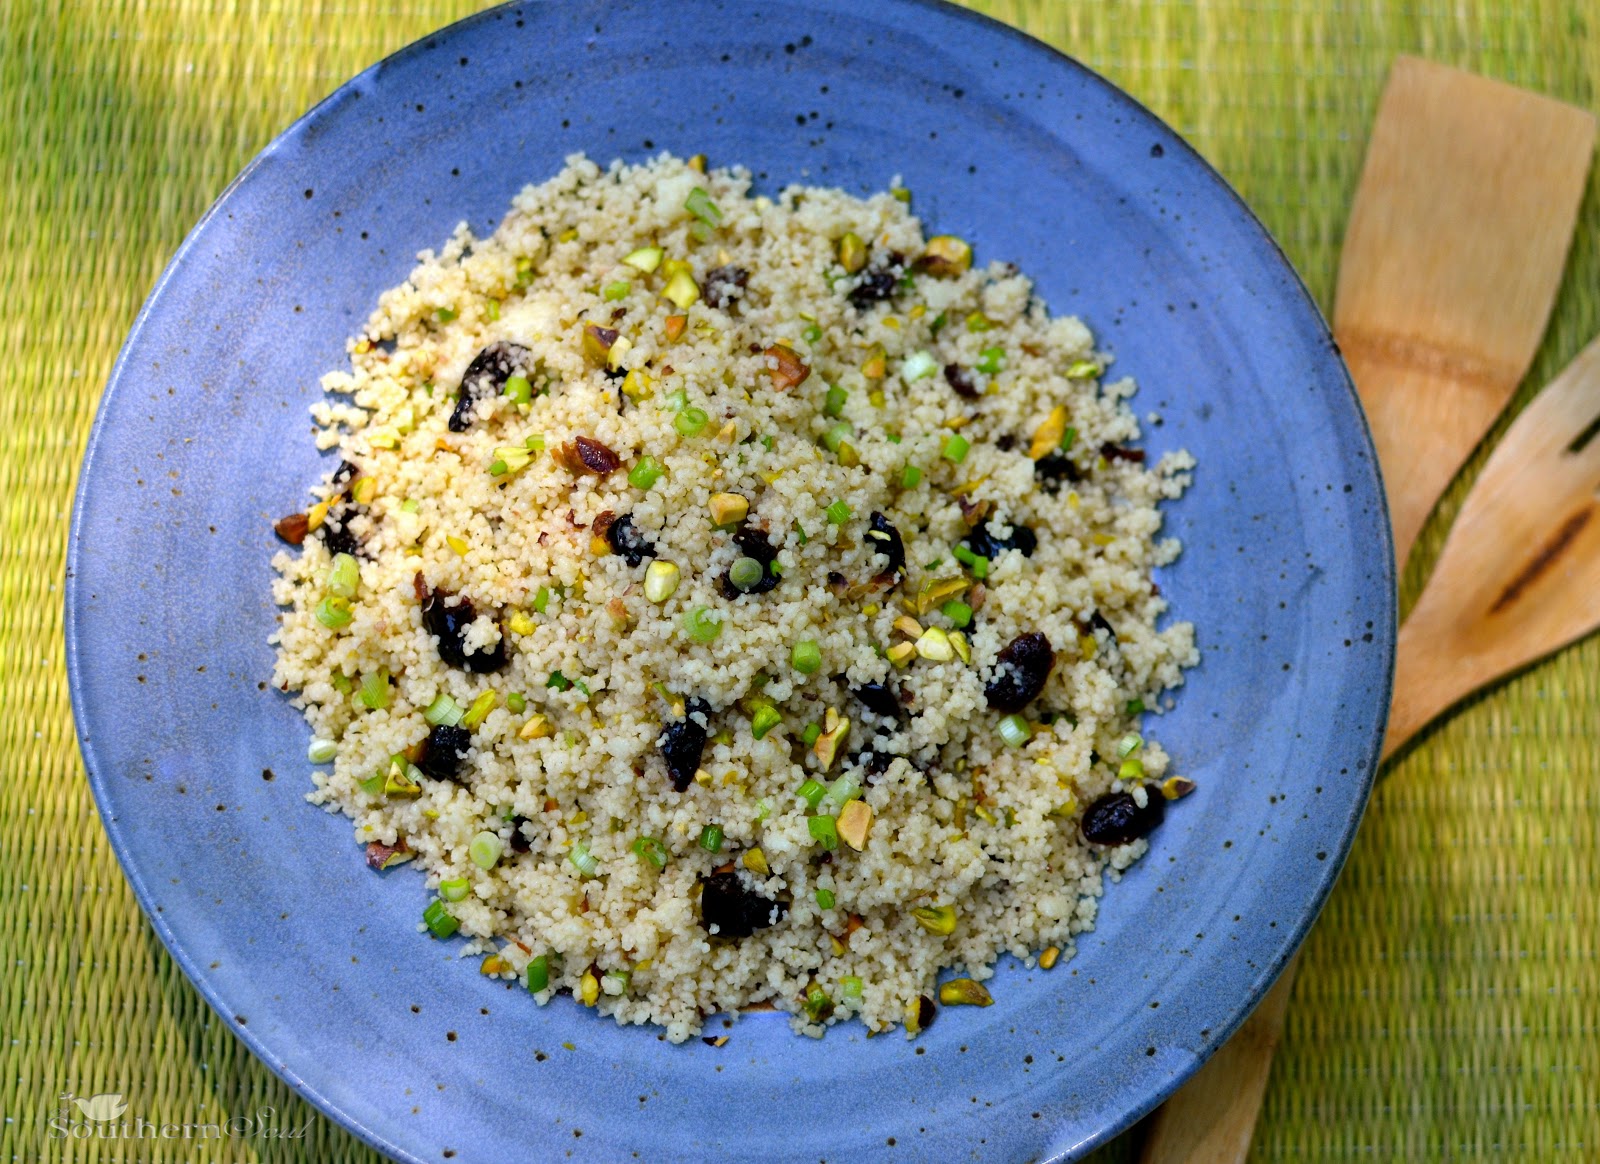 A Southern Soul: Couscous with Spring Onions, Pistachios and Dried Cherries